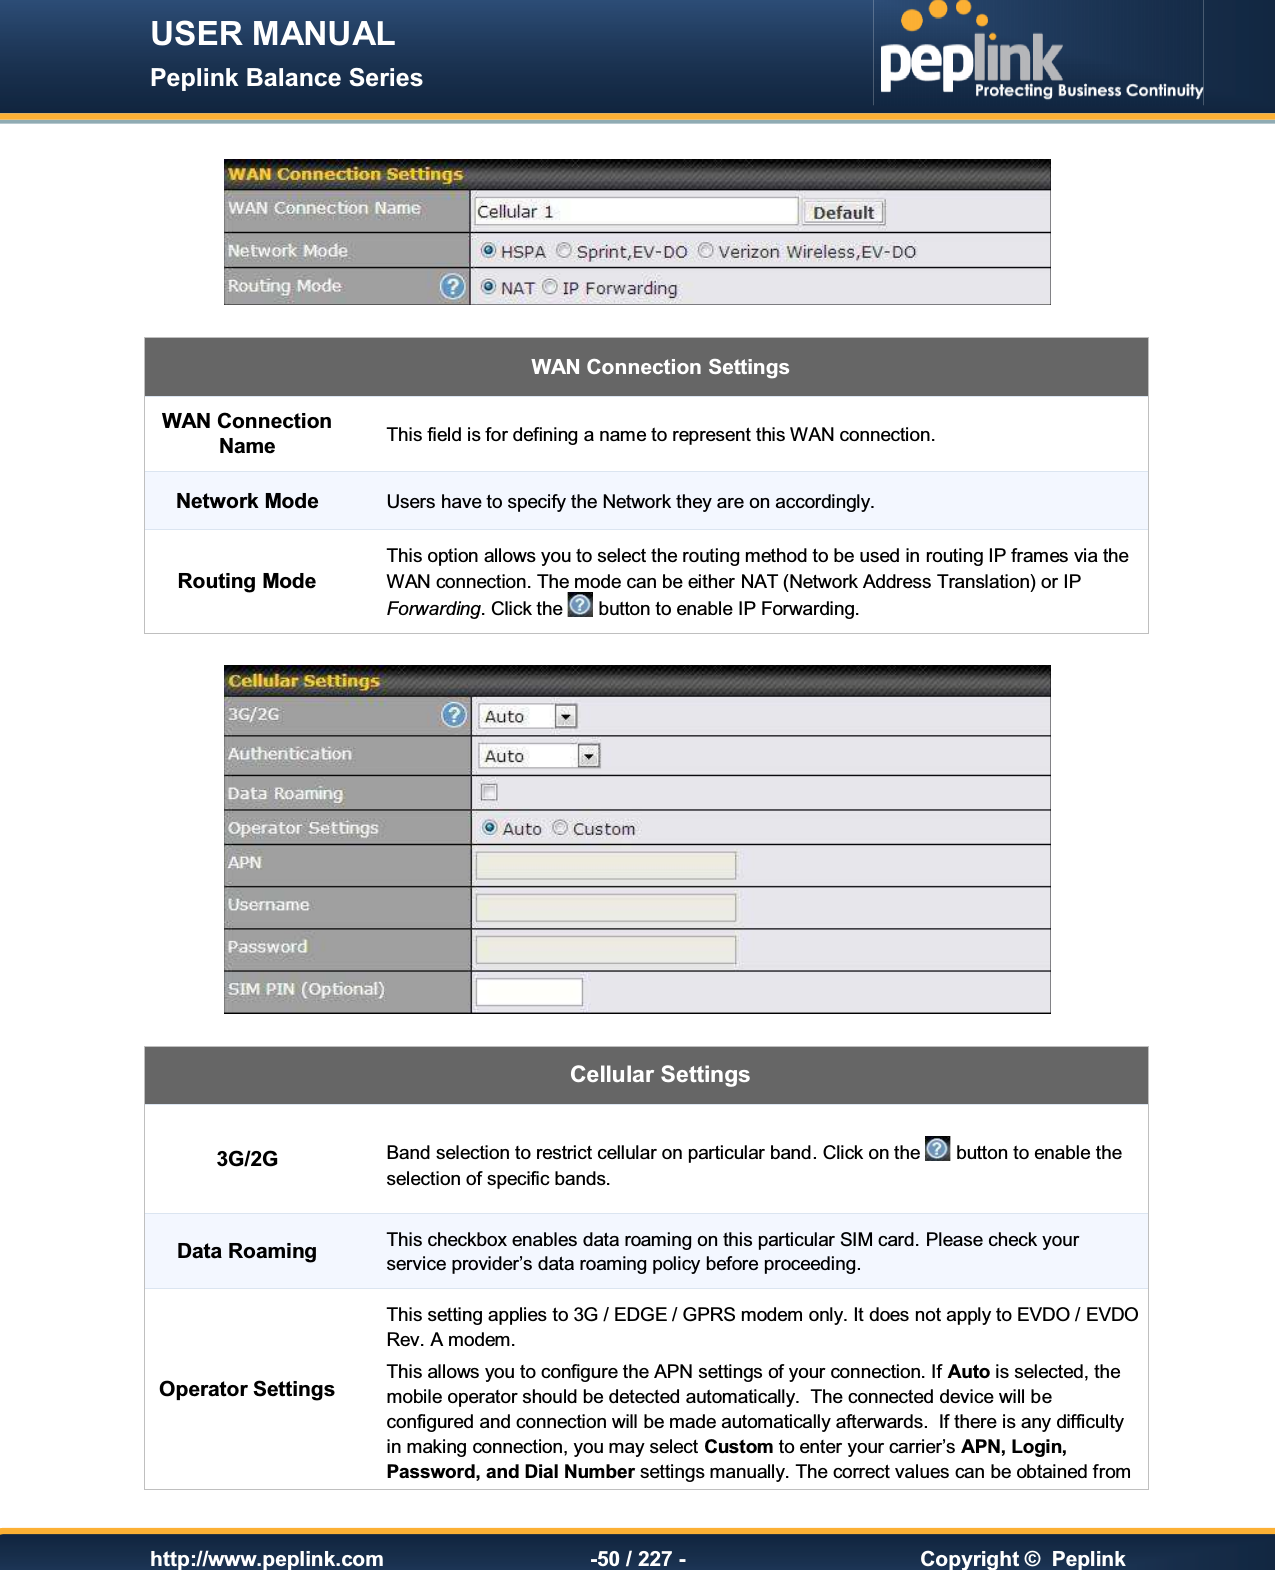 USER MANUAL Peplink Balance Series   http://www.peplink.com -50 / 227 -  Copyright ©  Peplink    WAN Connection Settings WAN Connection Name This field is for defining a name to represent this WAN connection. Network Mode Users have to specify the Network they are on accordingly. Routing Mode This option allows you to select the routing method to be used in routing IP frames via the WAN connection. The mode can be either NAT (Network Address Translation) or IP Forwarding. Click the   button to enable IP Forwarding.    Cellular Settings 3G/2G  Band selection to restrict cellular on particular band. Click on the   button to enable the selection of specific bands. Data Roaming This checkbox enables data roaming on this particular SIM card. Please check your service provider’s data roaming policy before proceeding. Operator Settings This setting applies to 3G / EDGE / GPRS modem only. It does not apply to EVDO / EVDO Rev. A modem. This allows you to configure the APN settings of your connection. If Auto is selected, the mobile operator should be detected automatically.  The connected device will be configured and connection will be made automatically afterwards.  If there is any difficulty in making connection, you may select Custom to enter your carrier’s APN, Login, Password, and Dial Number settings manually. The correct values can be obtained from 